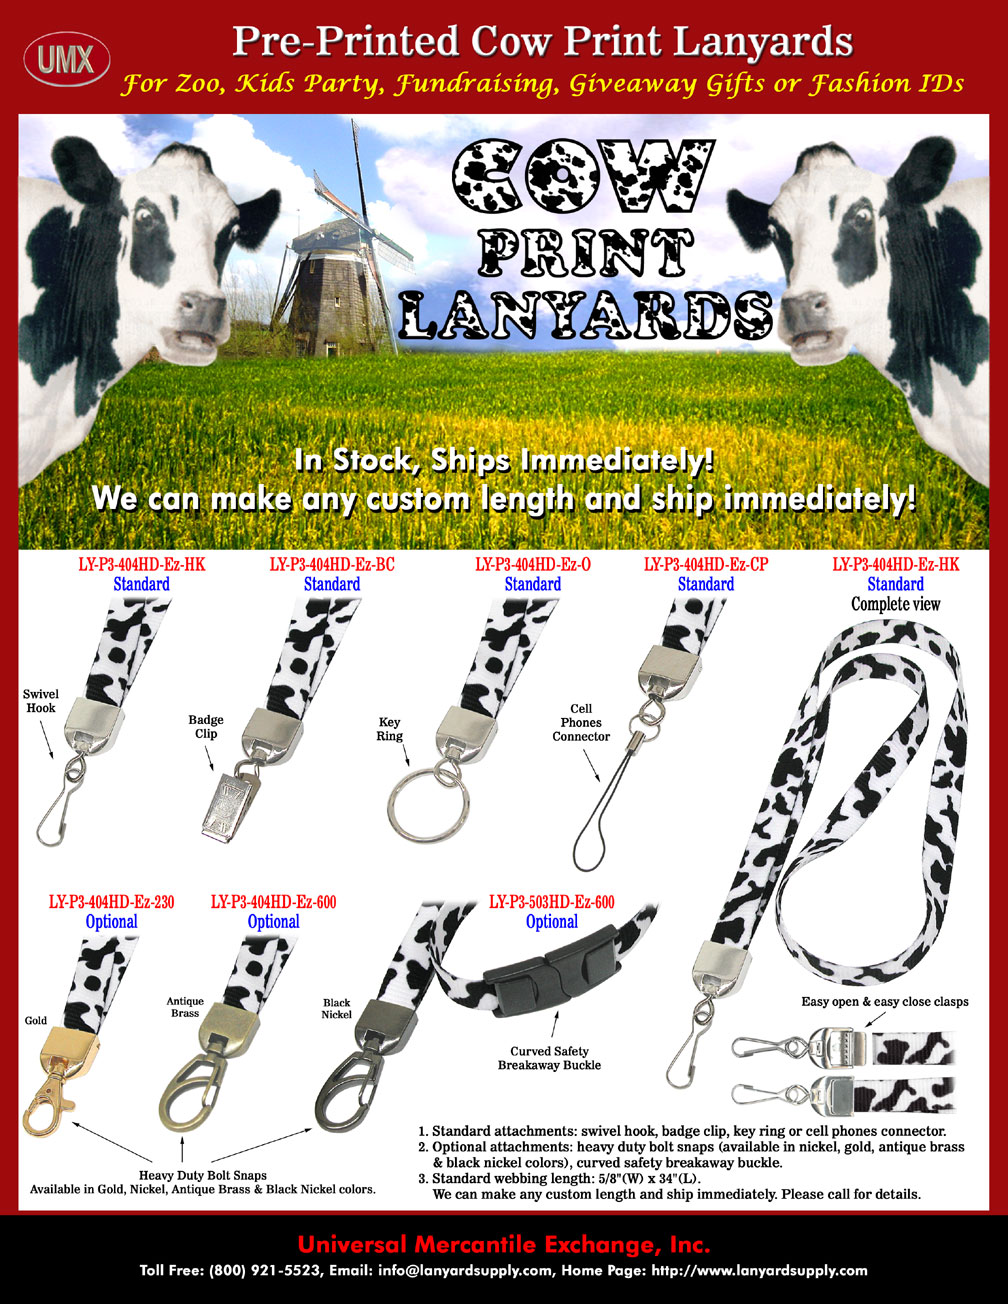 Cow Lanyards: Cow Print Lanyards, Cow Spots or Cow Patterns Printed Animal Lanyards. Good For Zoo, Kids Party, Fundraising, Promotional Giveaway, Gifts or For 